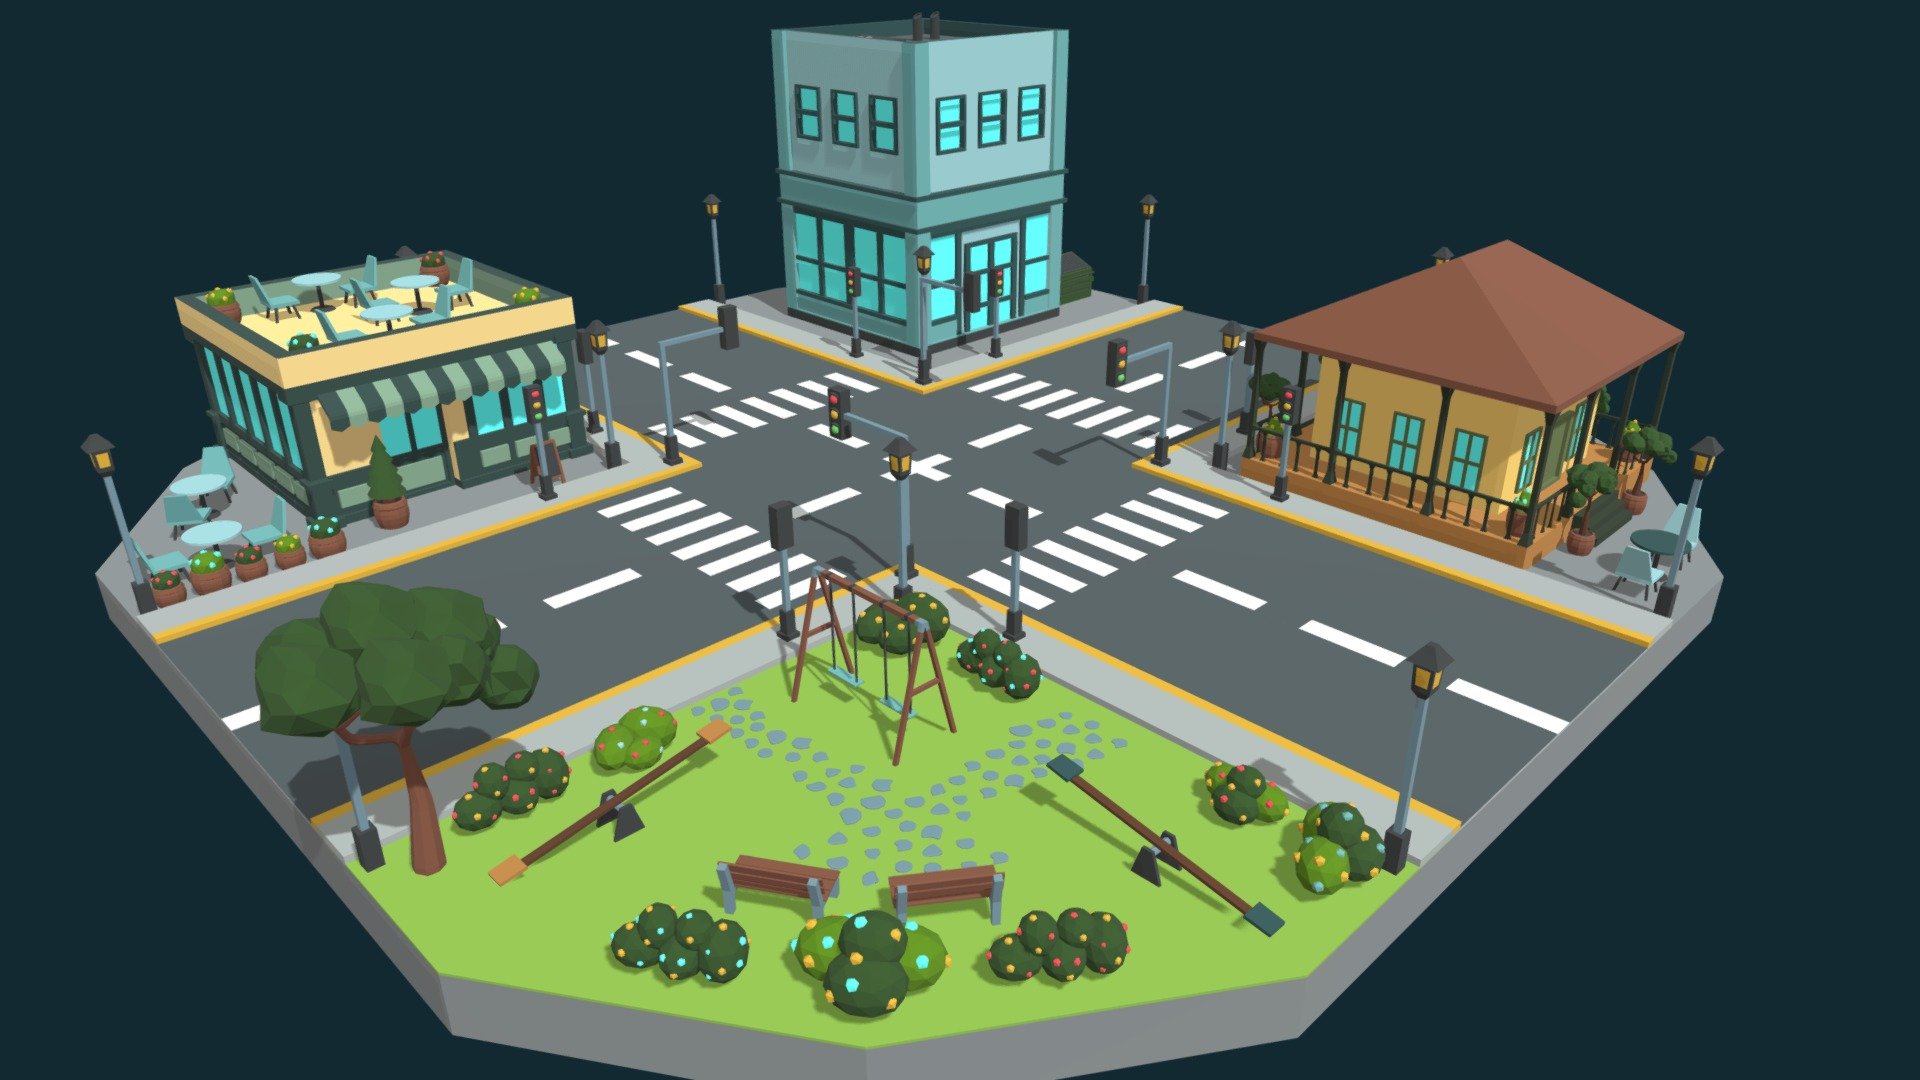 Low Poly Town scene made in Blender that includes: 3 buildings, a park with benches and plants, roads with traffic lights and light poles, tables and chairs 3d model